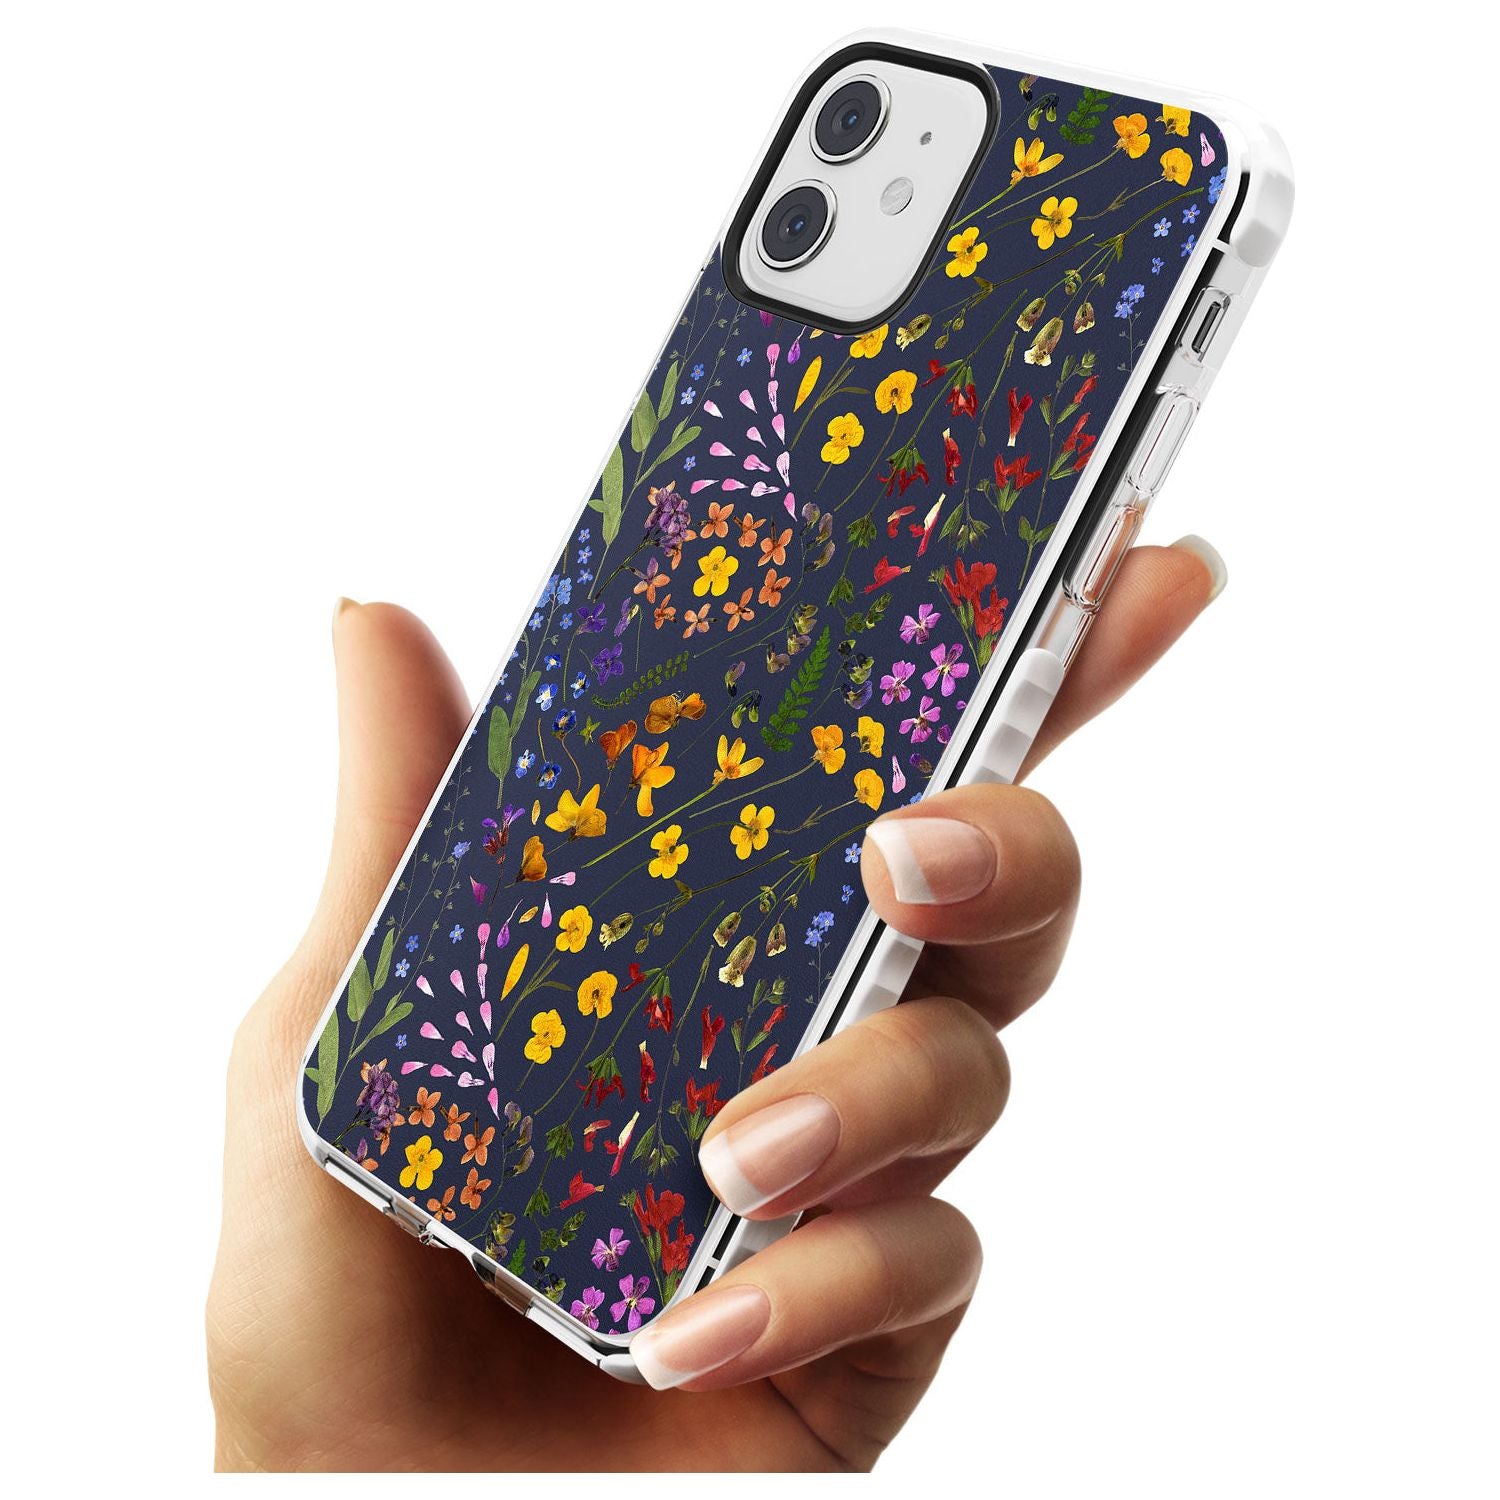 Wildflower & Leaves Cluster Design - Navy Impact Phone Case for iPhone 11